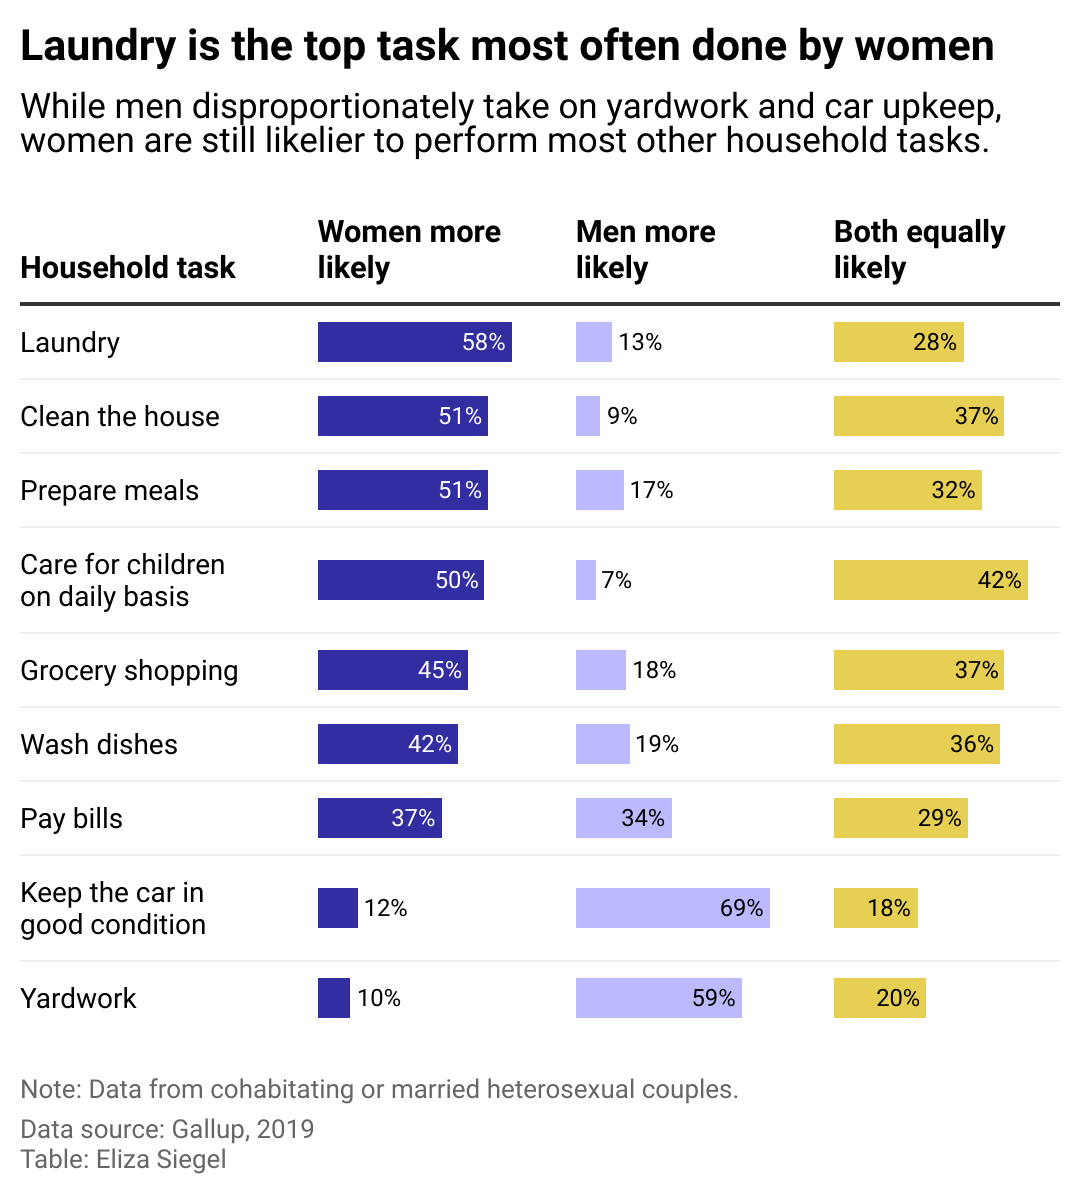 Bar chart showing a ranked list of household tasks broken down by how likely women and men are to perform each task. Women are likelier to perform most household tasks, but men are likelier to do yardwork and car upkeep.